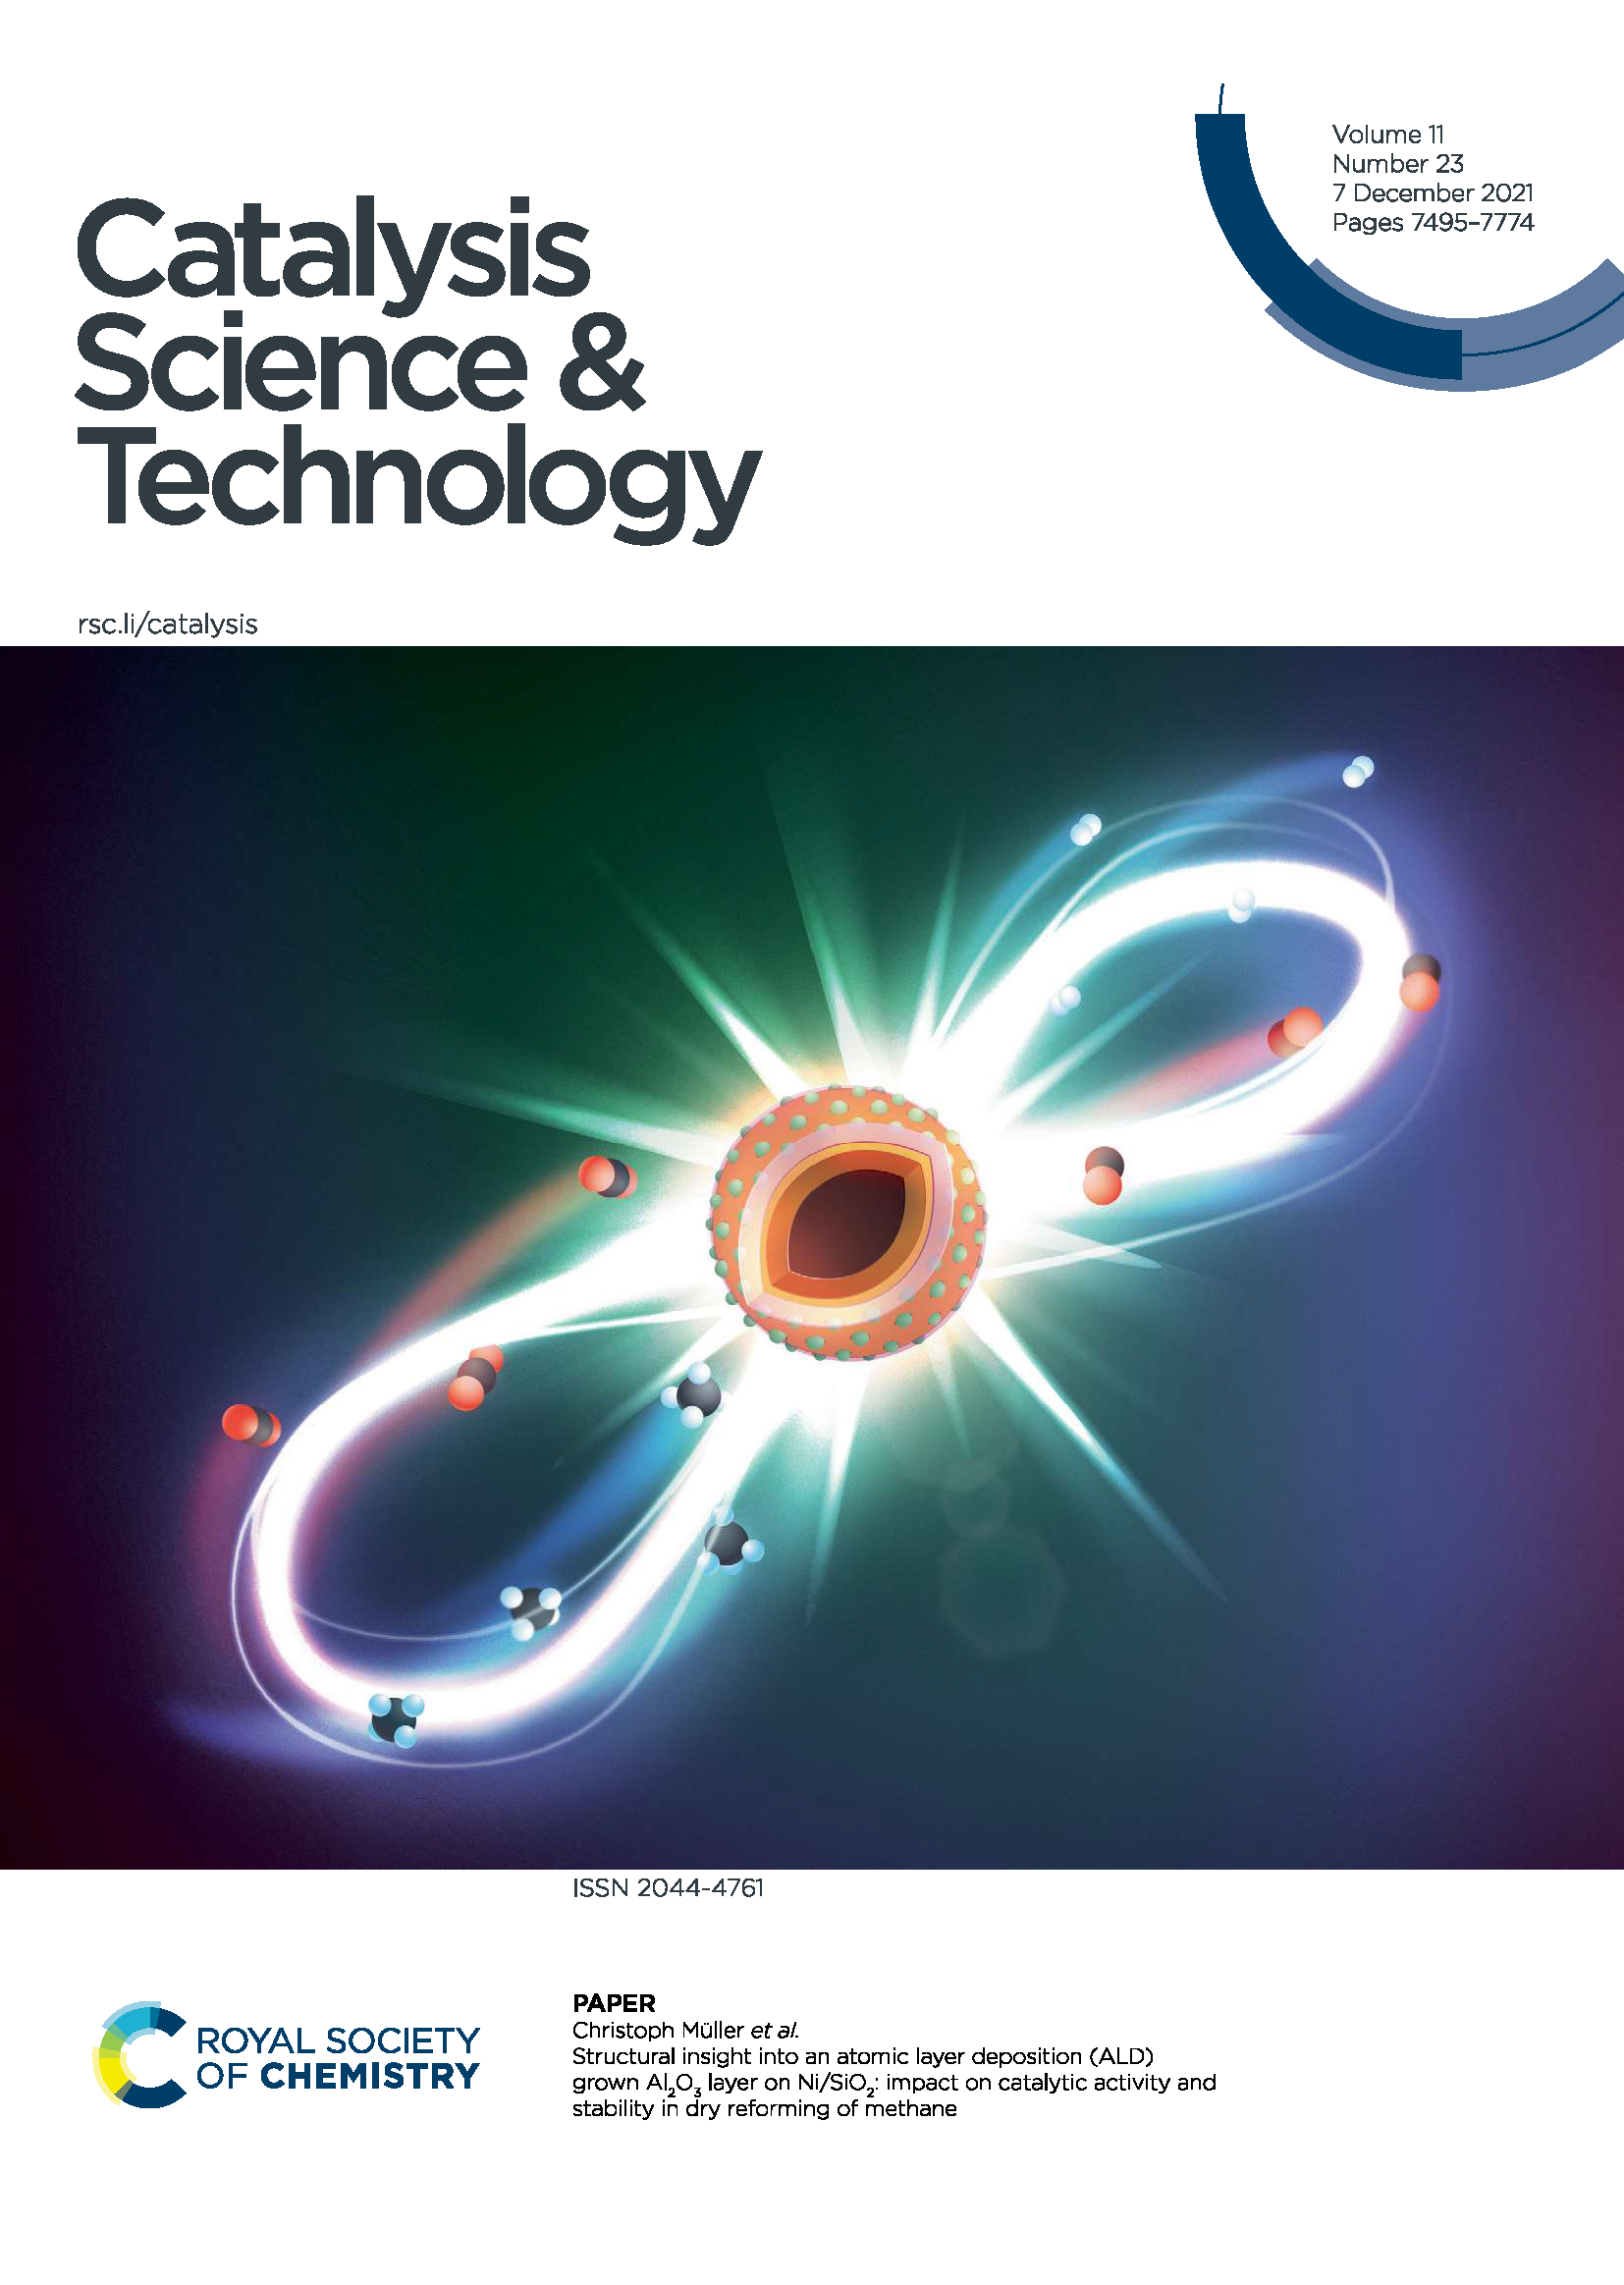 Our cover page in Catalysis Science & Technology: Structural 